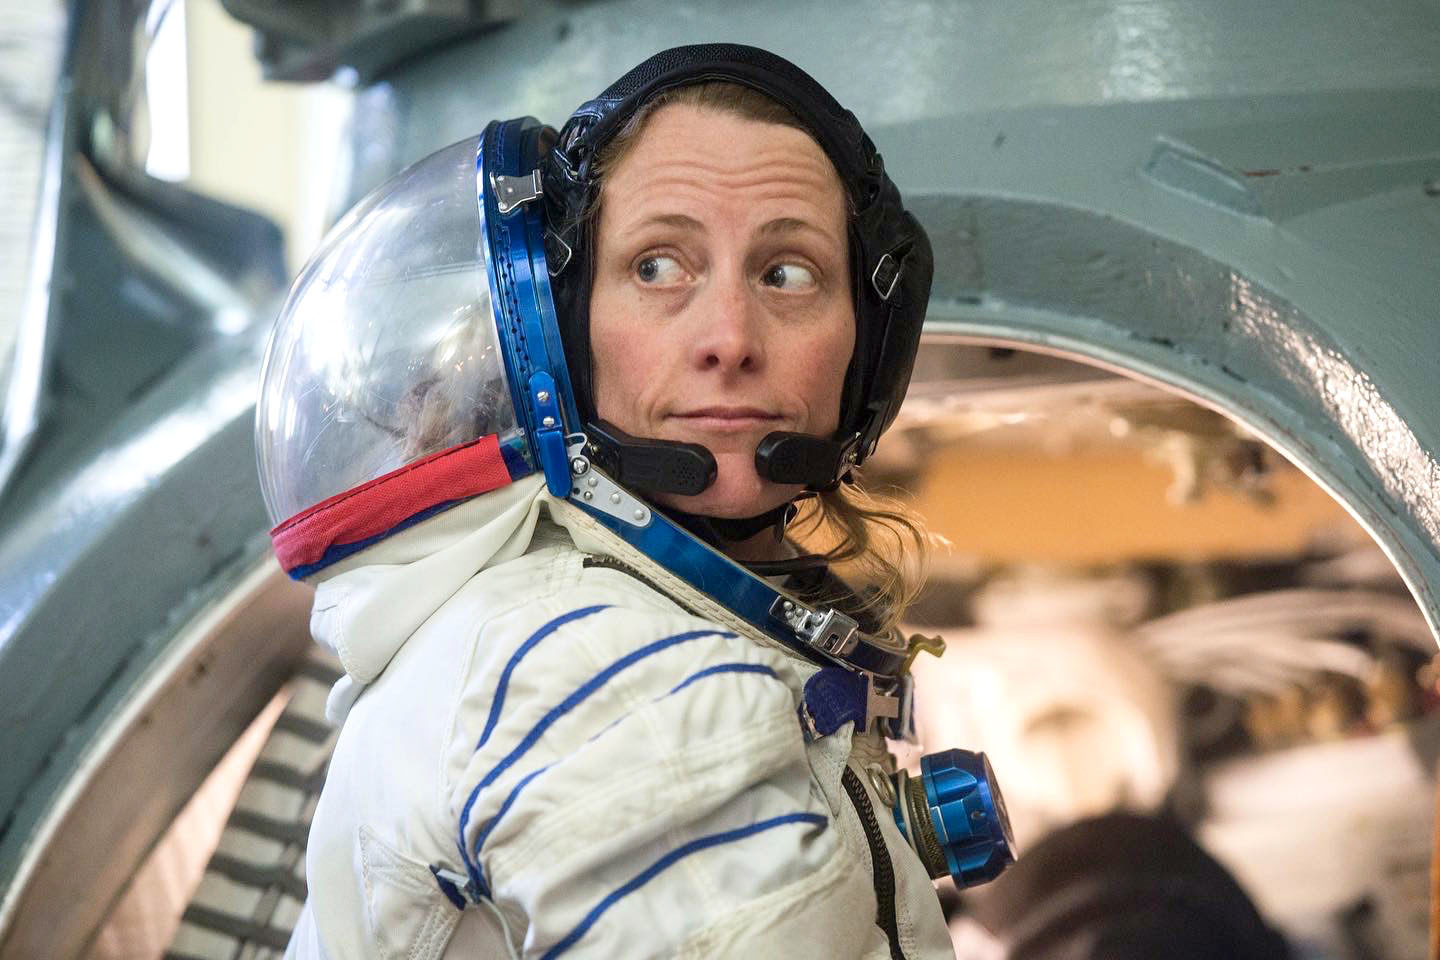 NASA astronaut Loral O'Hara prepares to enter a Soyuz spacecraft simulator in her Sokol launch and entry suit for preflight training before beginning her mission to the International Space Station